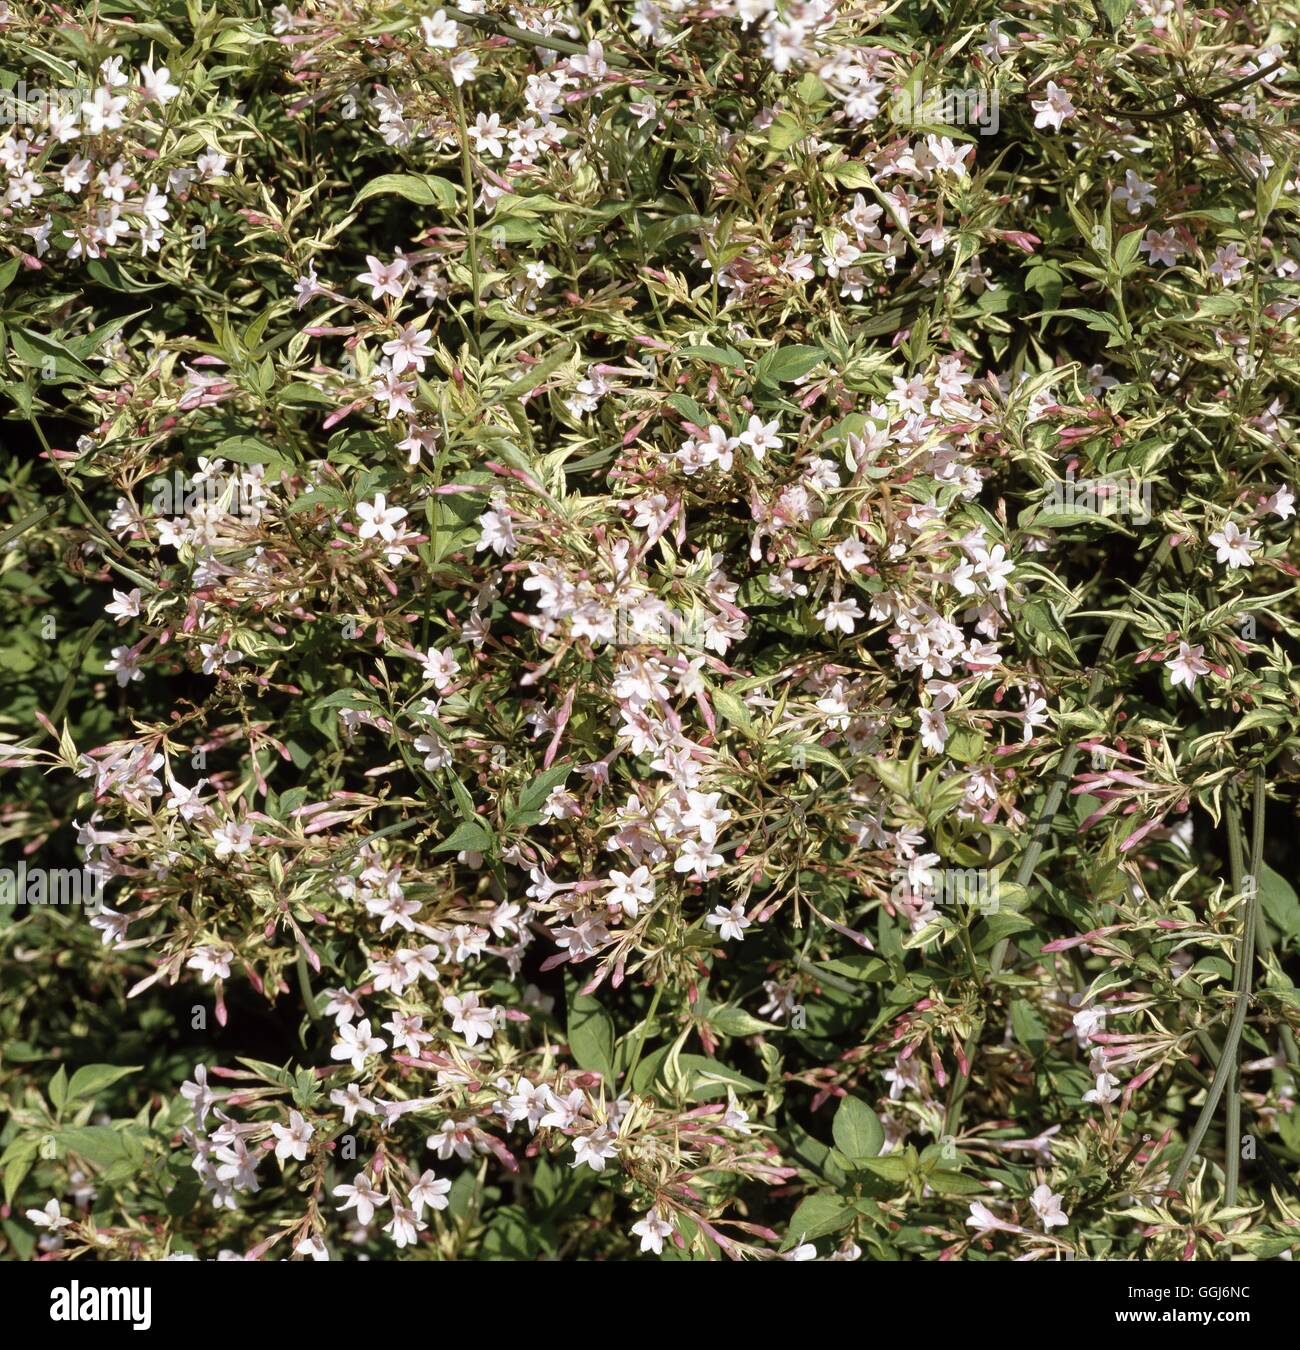 Stephanense Jasmine High Resolution Stock Photography and Images - Alamy